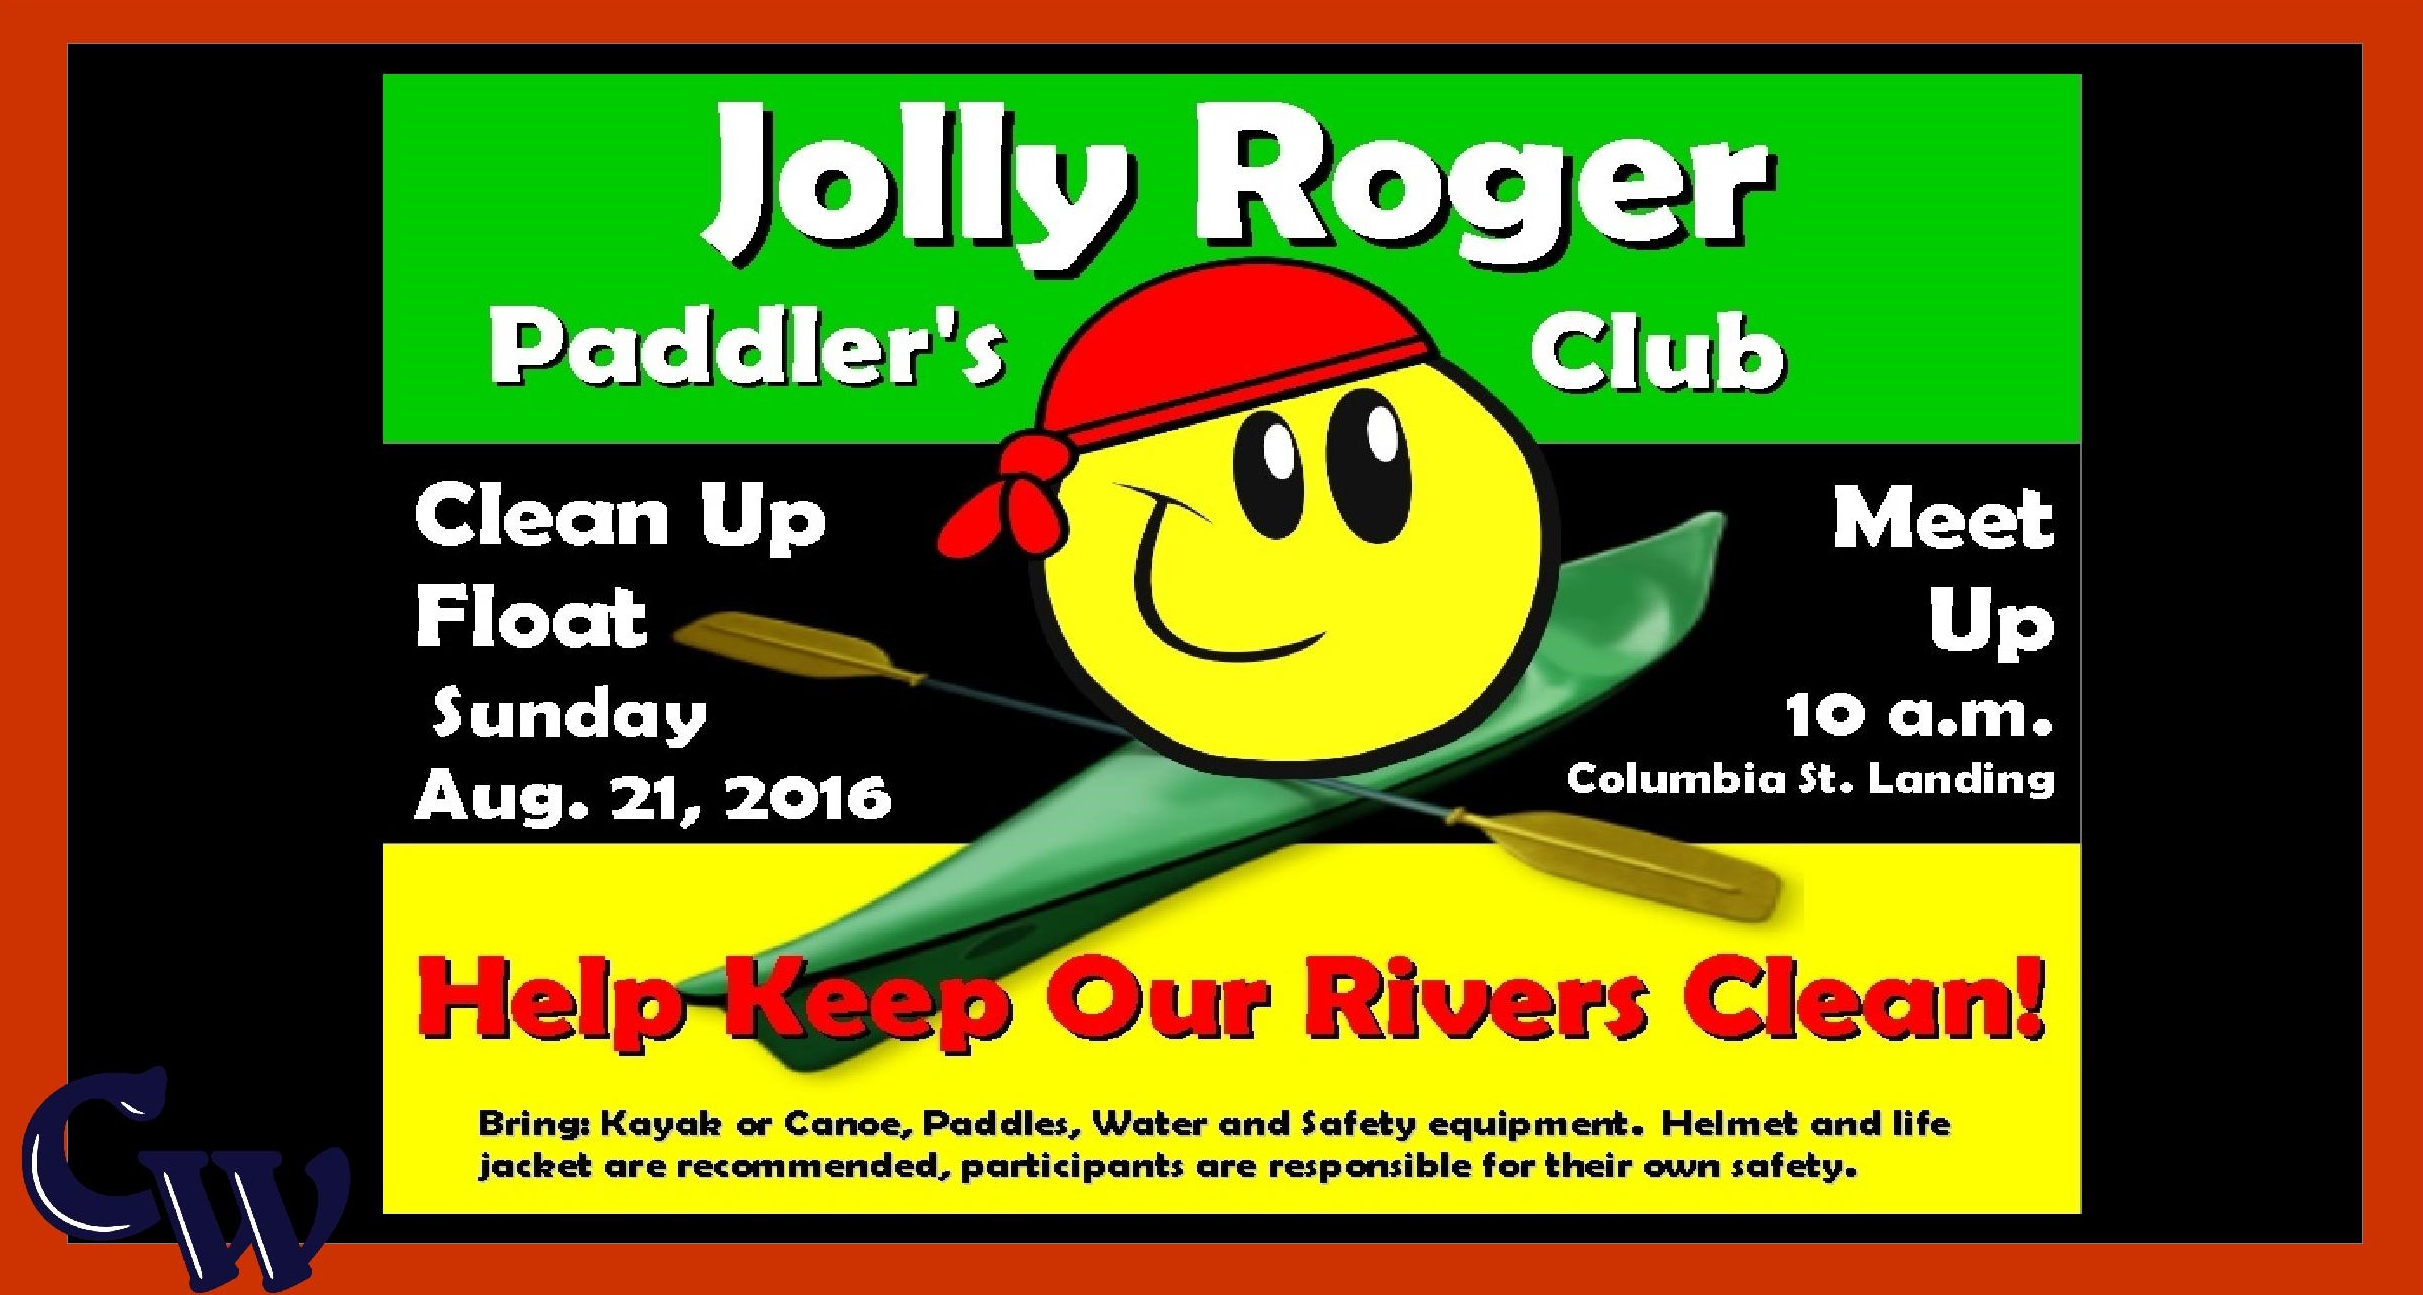 Jolly Roger Paddler’s Club Clean Up Float